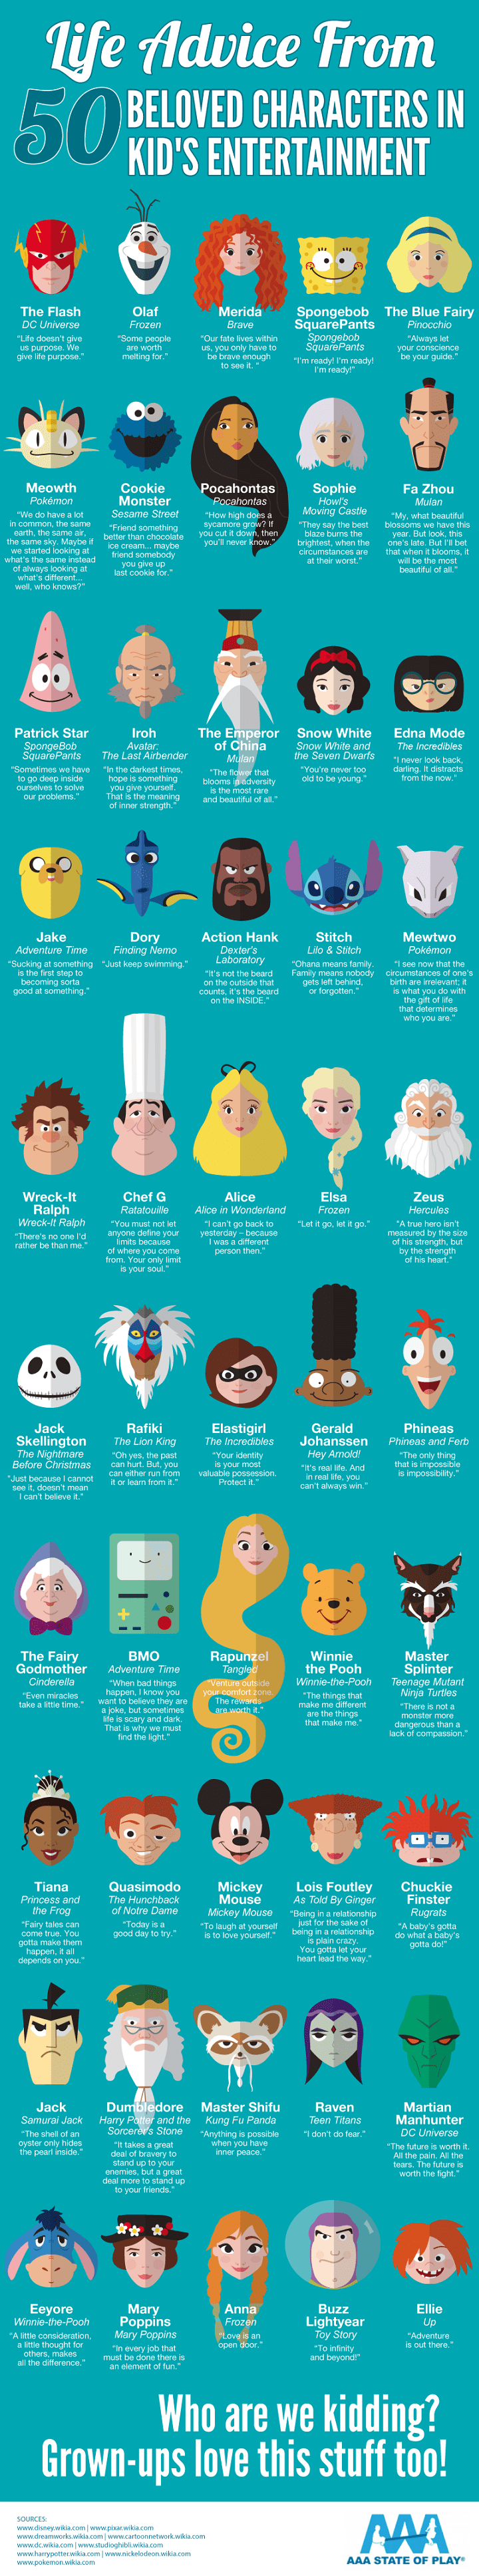 50 BELOVED CHARACTERS IN KID'S ENTERTAINMENT-Infographic